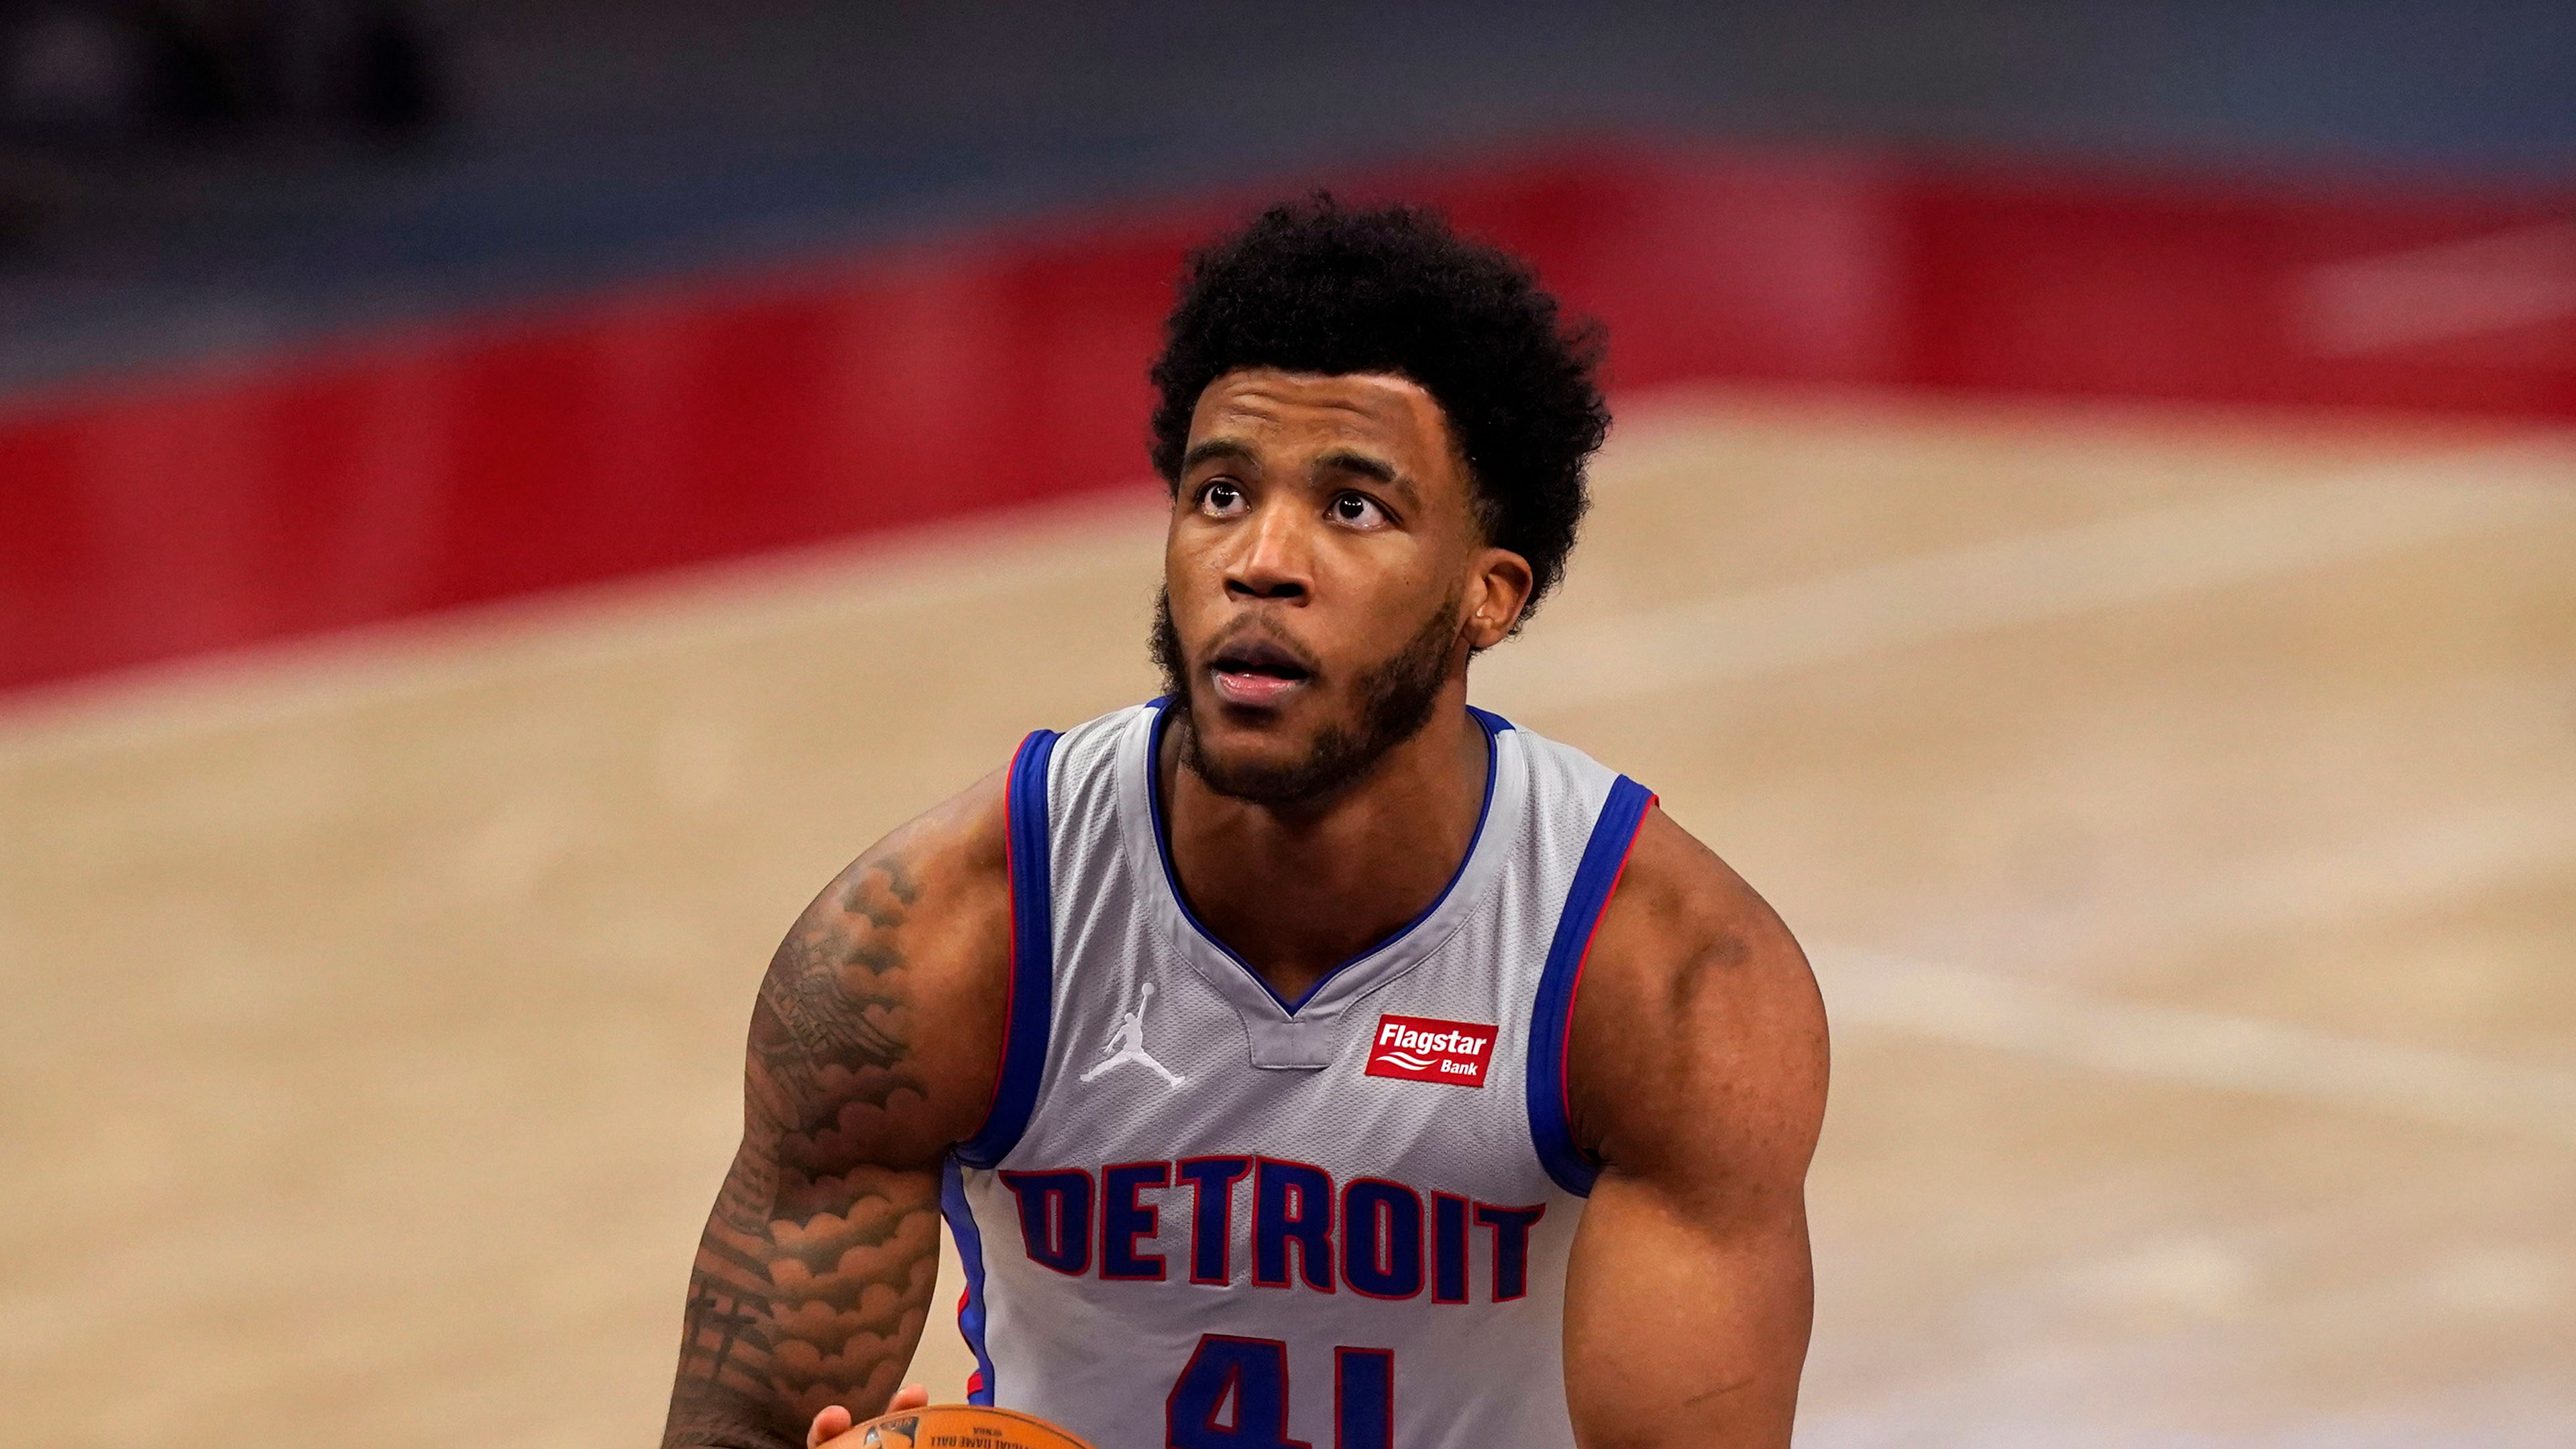 Saddiq Bey (born April 9, 1999) is an American professional basketball player for the Detroit Pistons of the National Basketball Association (NBA). He...